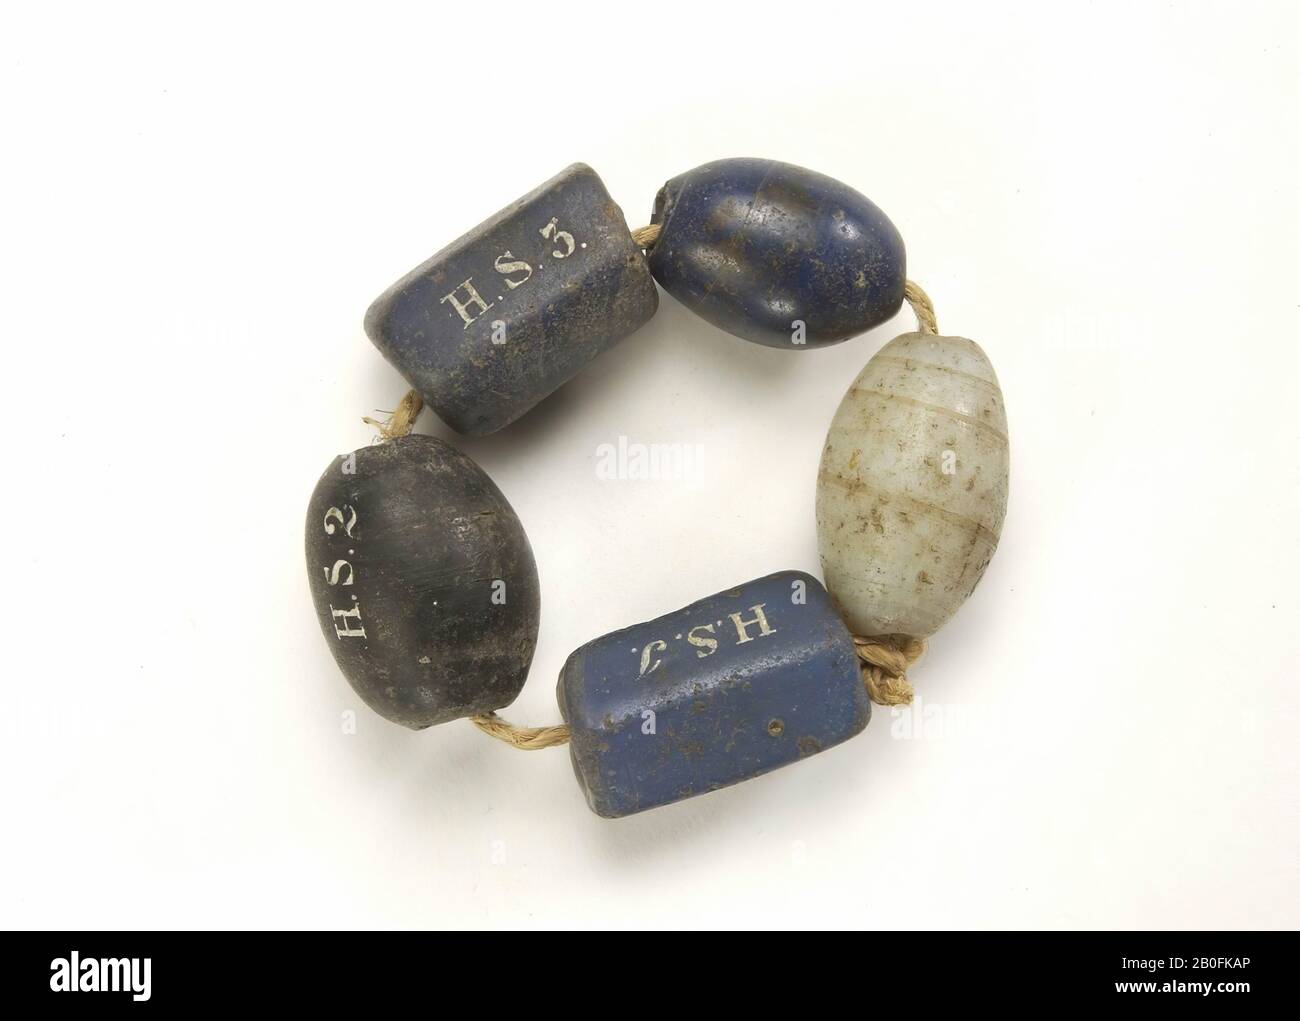 This bead belongs to the other HS No. 4-5. brand, G V 256., bead, rod bead, glass, height: 1,6 cm, 16th-17th century 1500-1700, Netherlands, North Holland, Haarlemmermeer, Haarlemmermeer Stock Photo